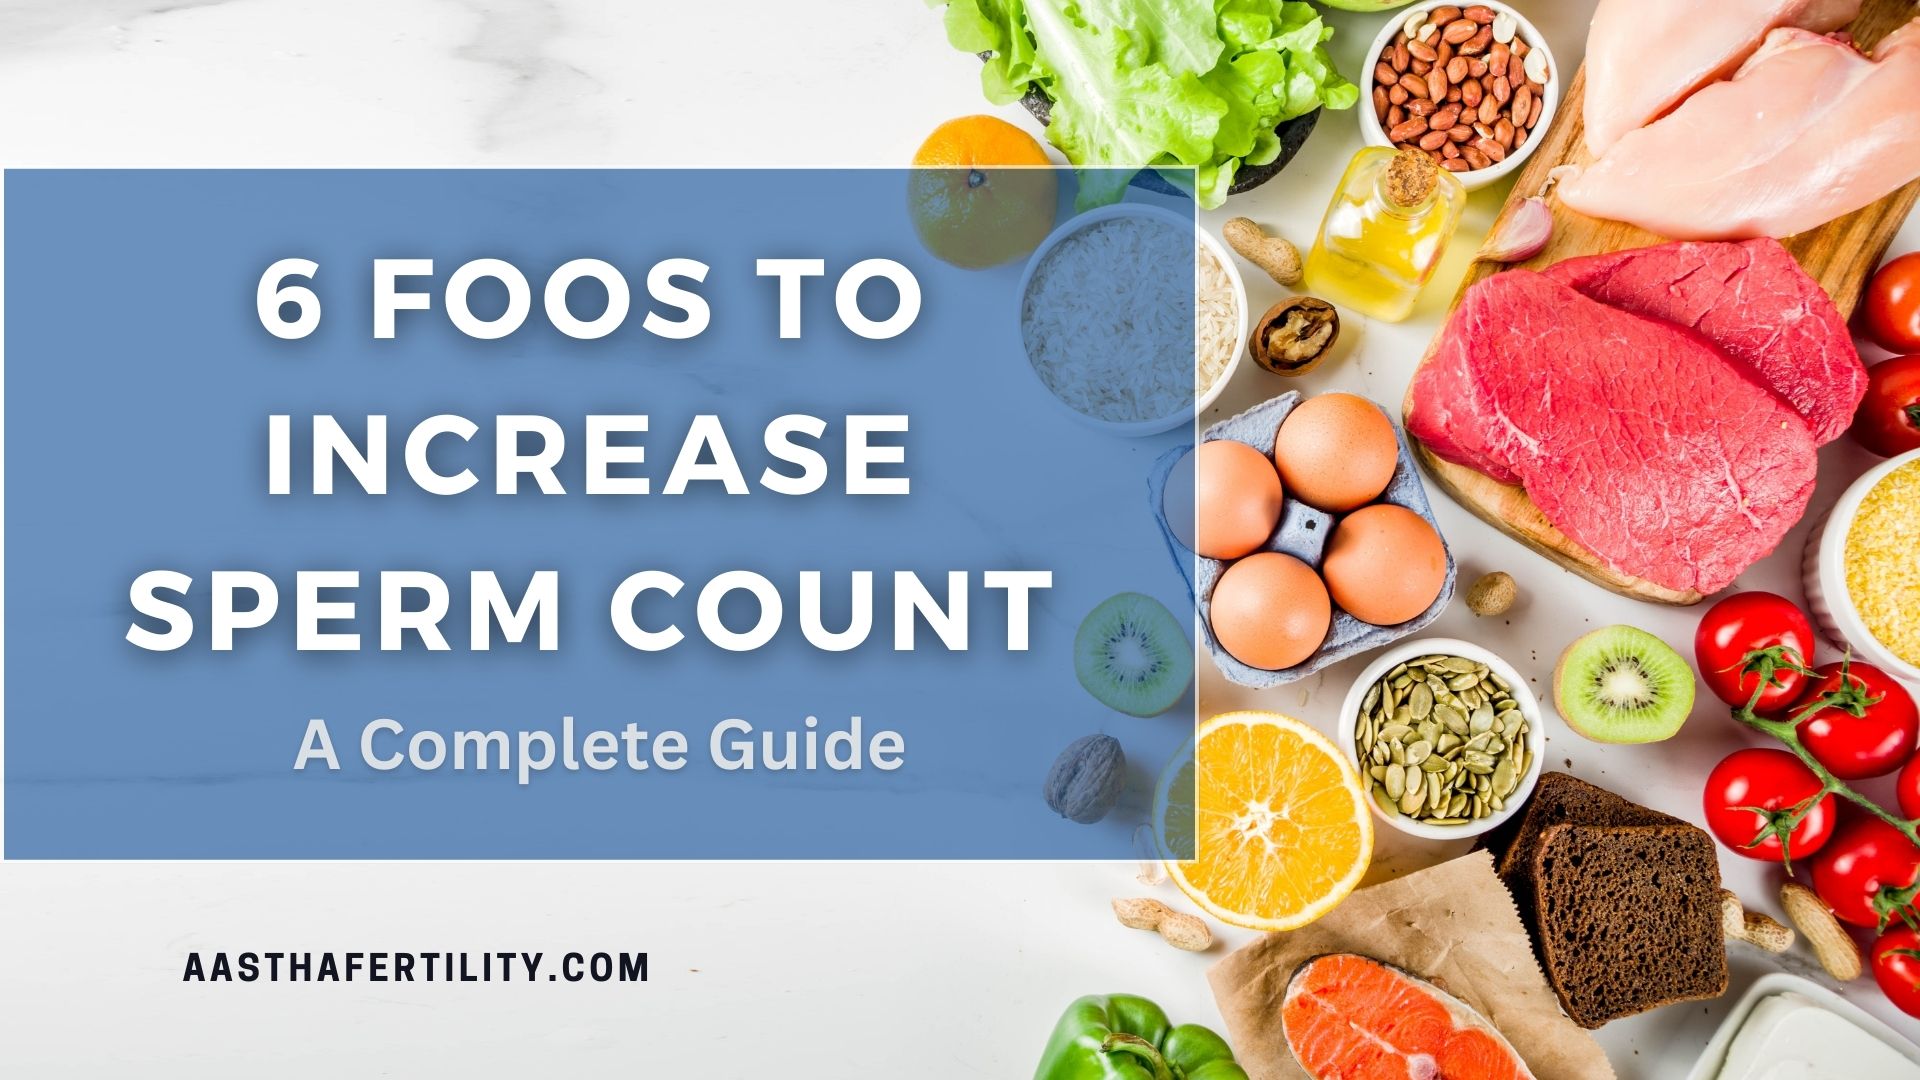 6 Foods to increase sperm count